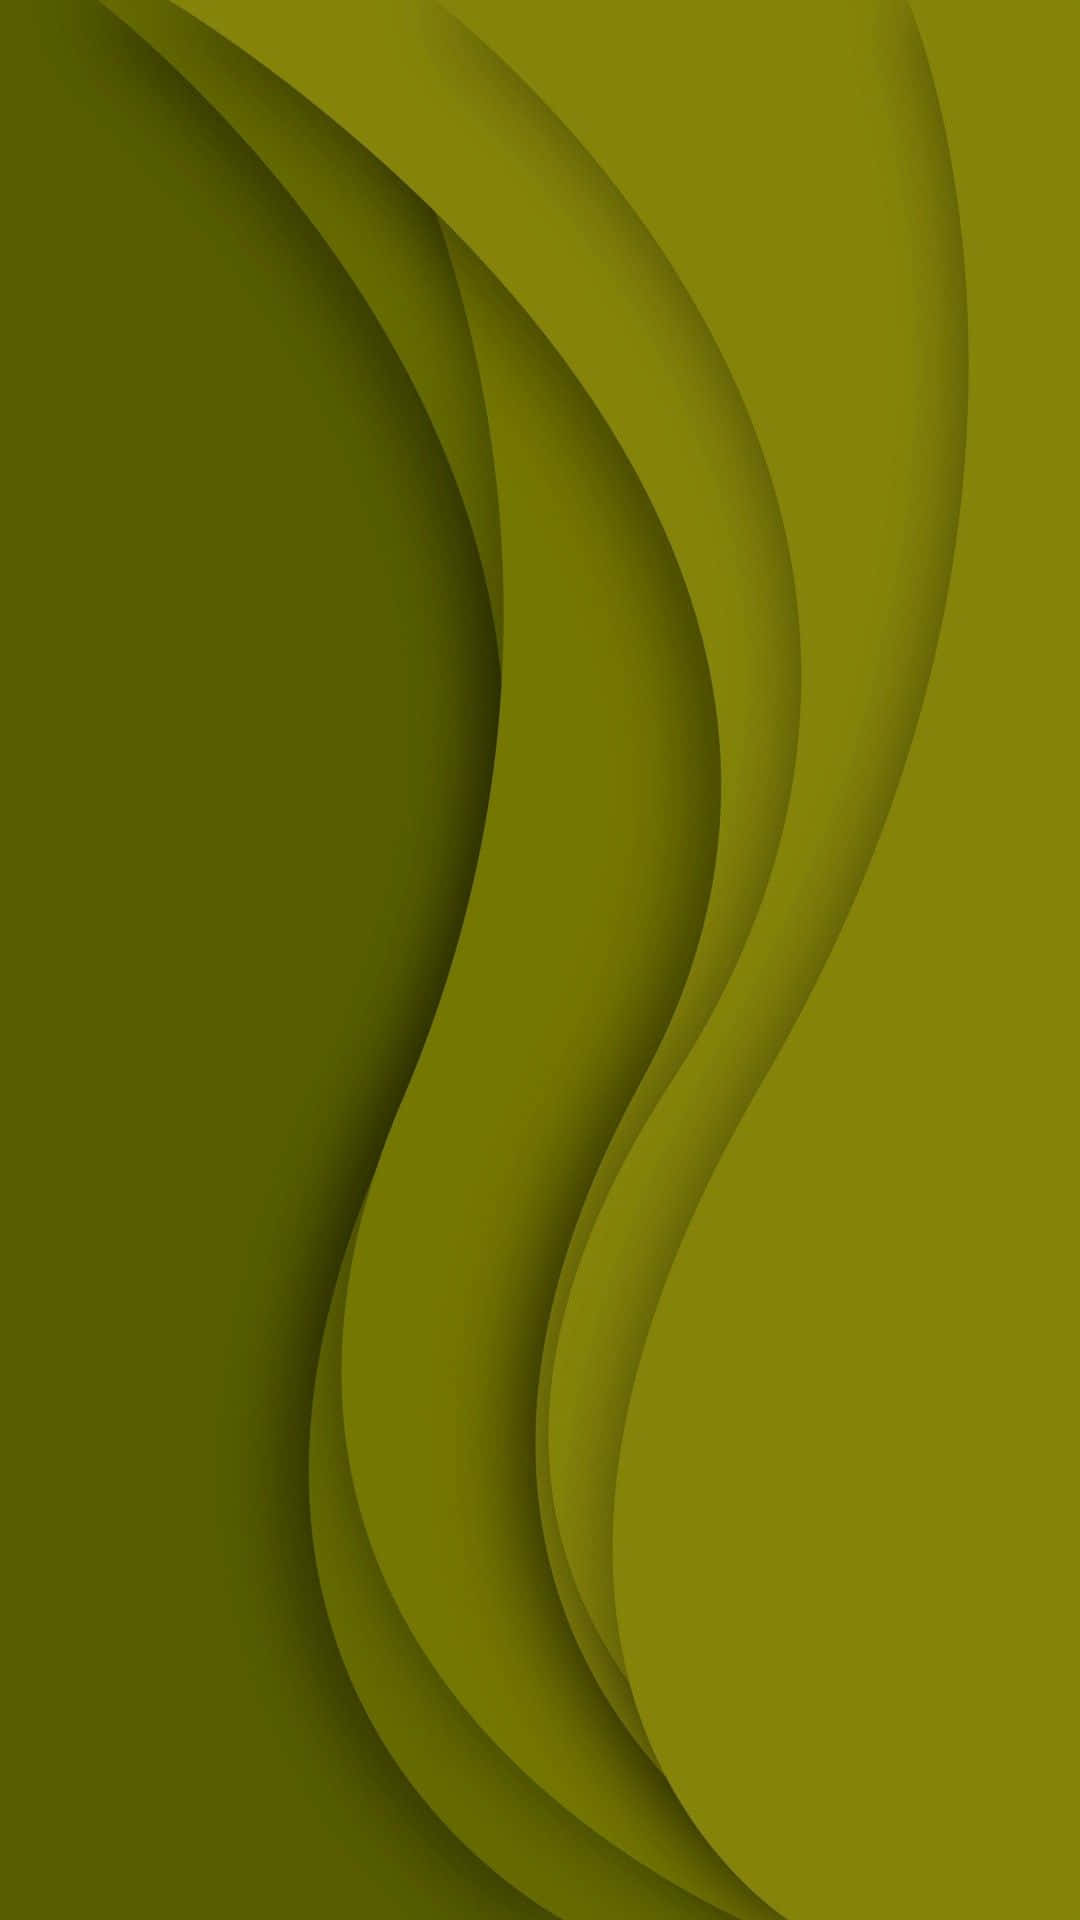 Get the Latest Apple iPhone 12 Pro in Olive Green Wallpaper